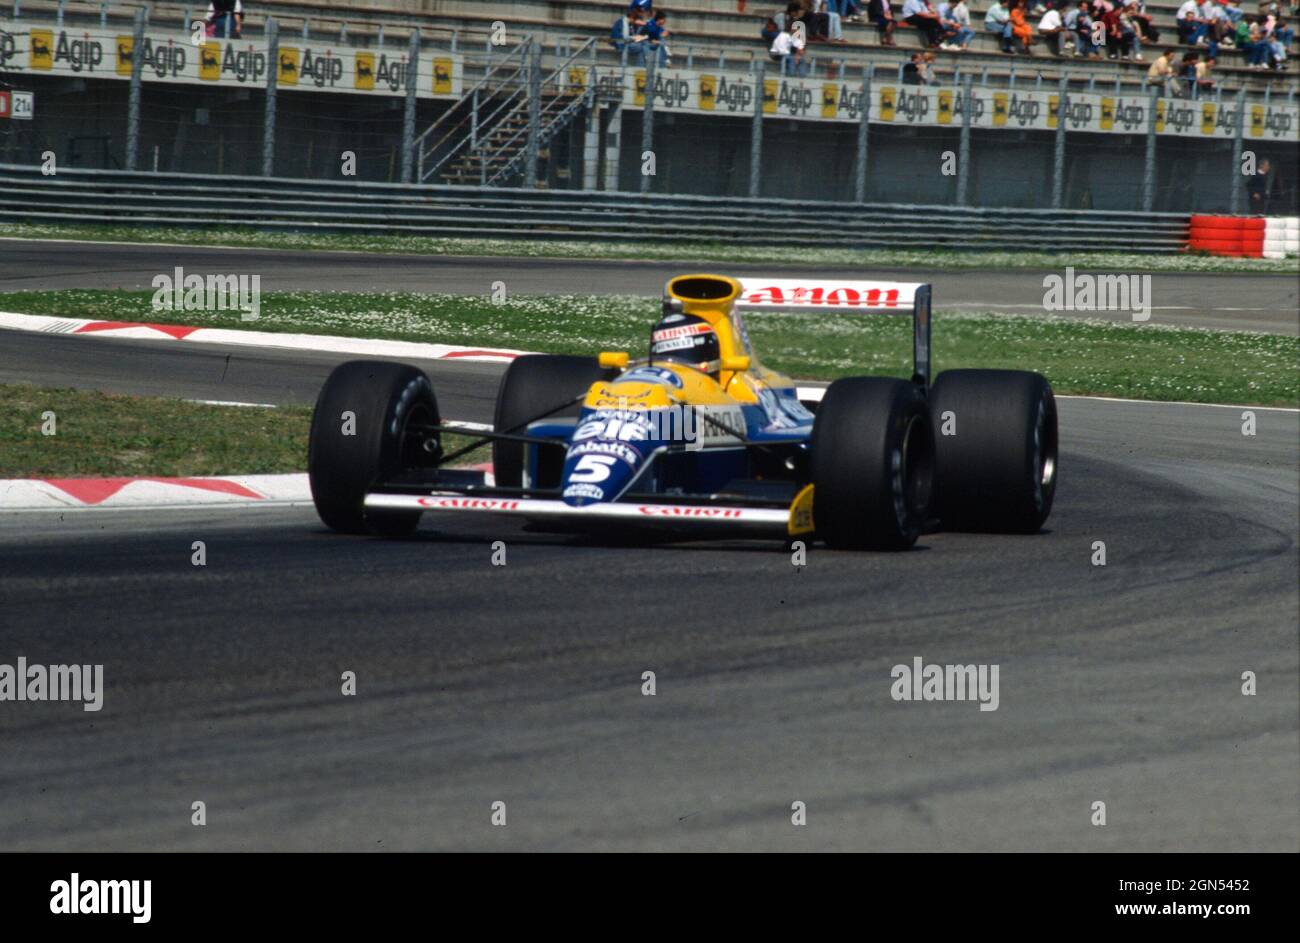 Imola, April 1990: Thierry Boutsen on Williams fw13 during free practice at the Imola circuit in preparation for the San Marino Grand Prix. Italy Stock Photo